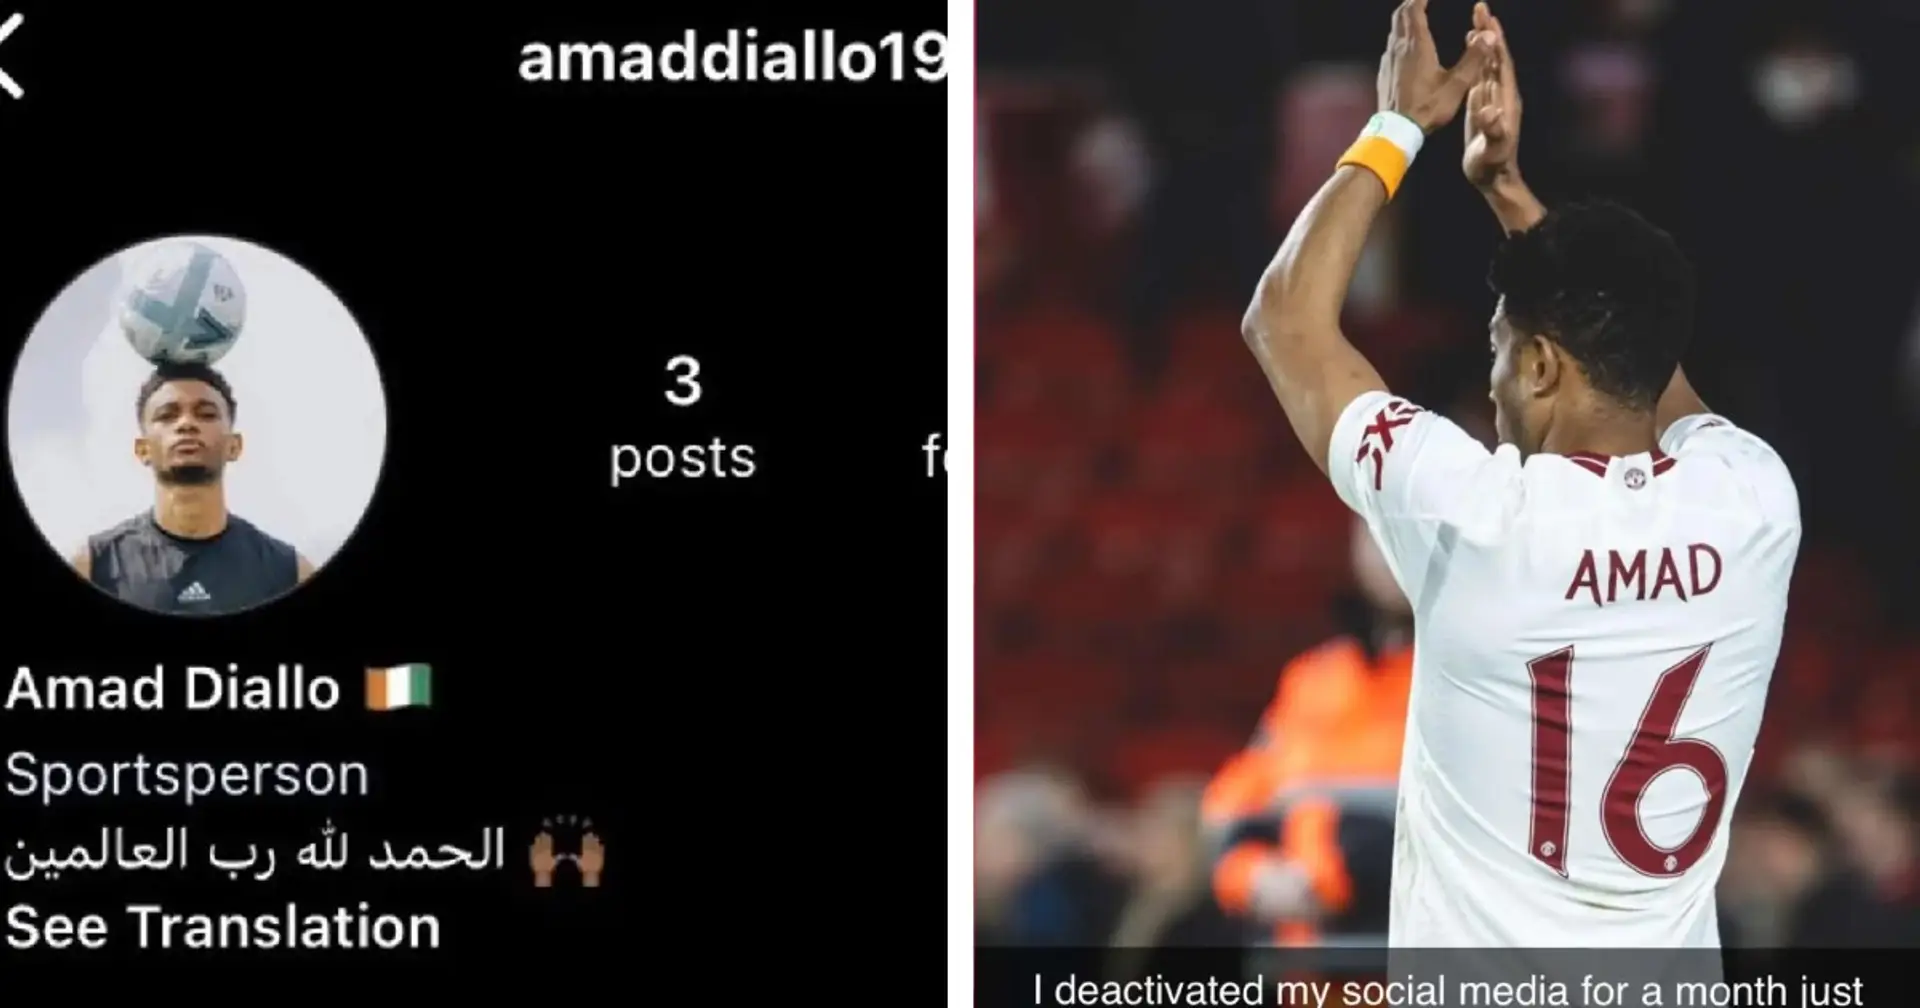 Amad gives reason for deleting Man United references on social media